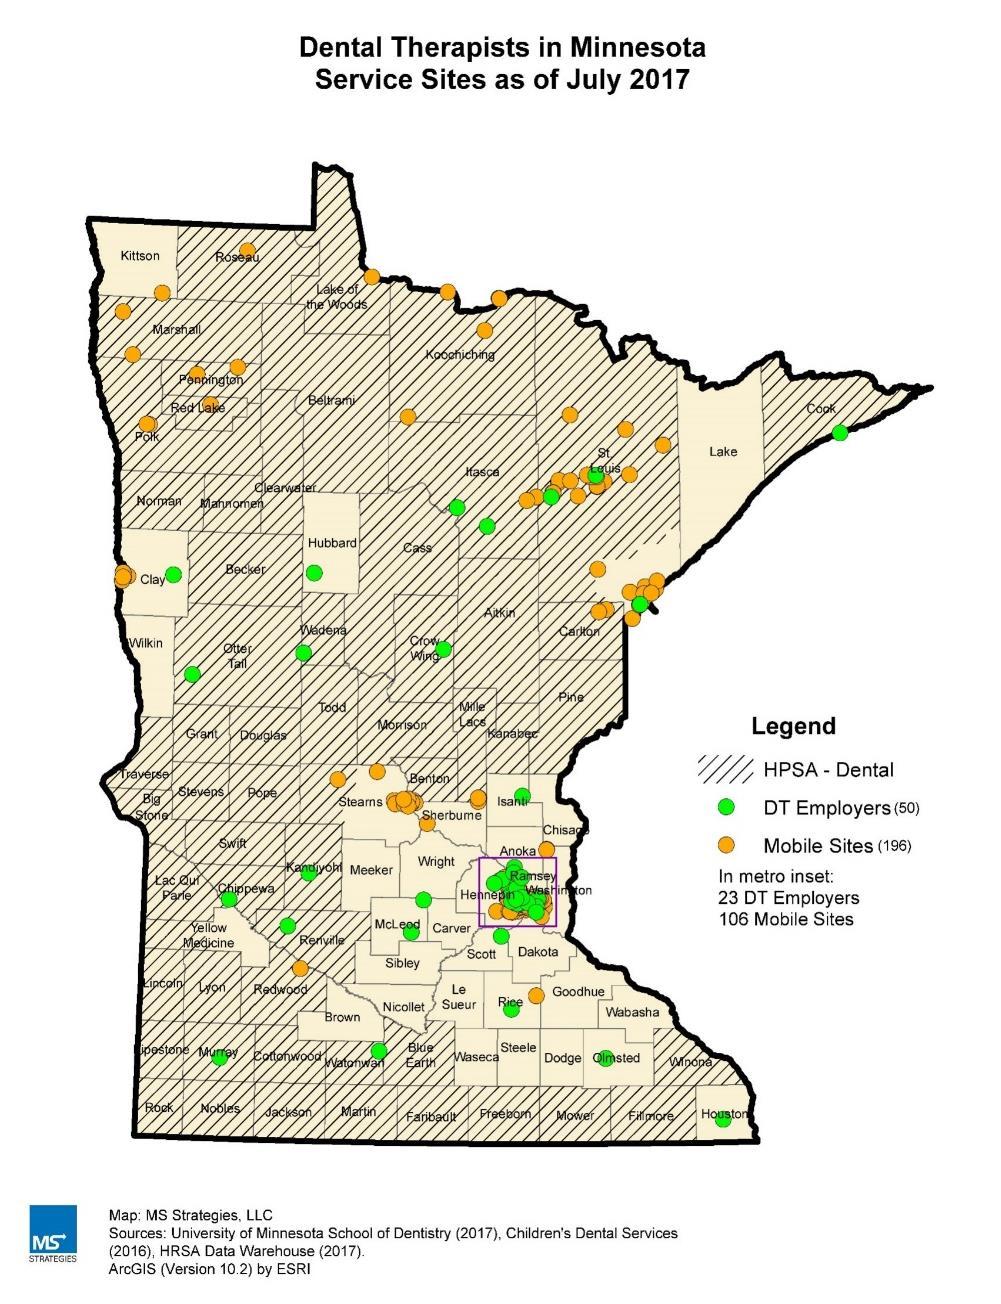 MN: Increasing Access to Care Higher proportion of DTs in rural areas than other health professions DTs provide services at 370 mobile dental sites